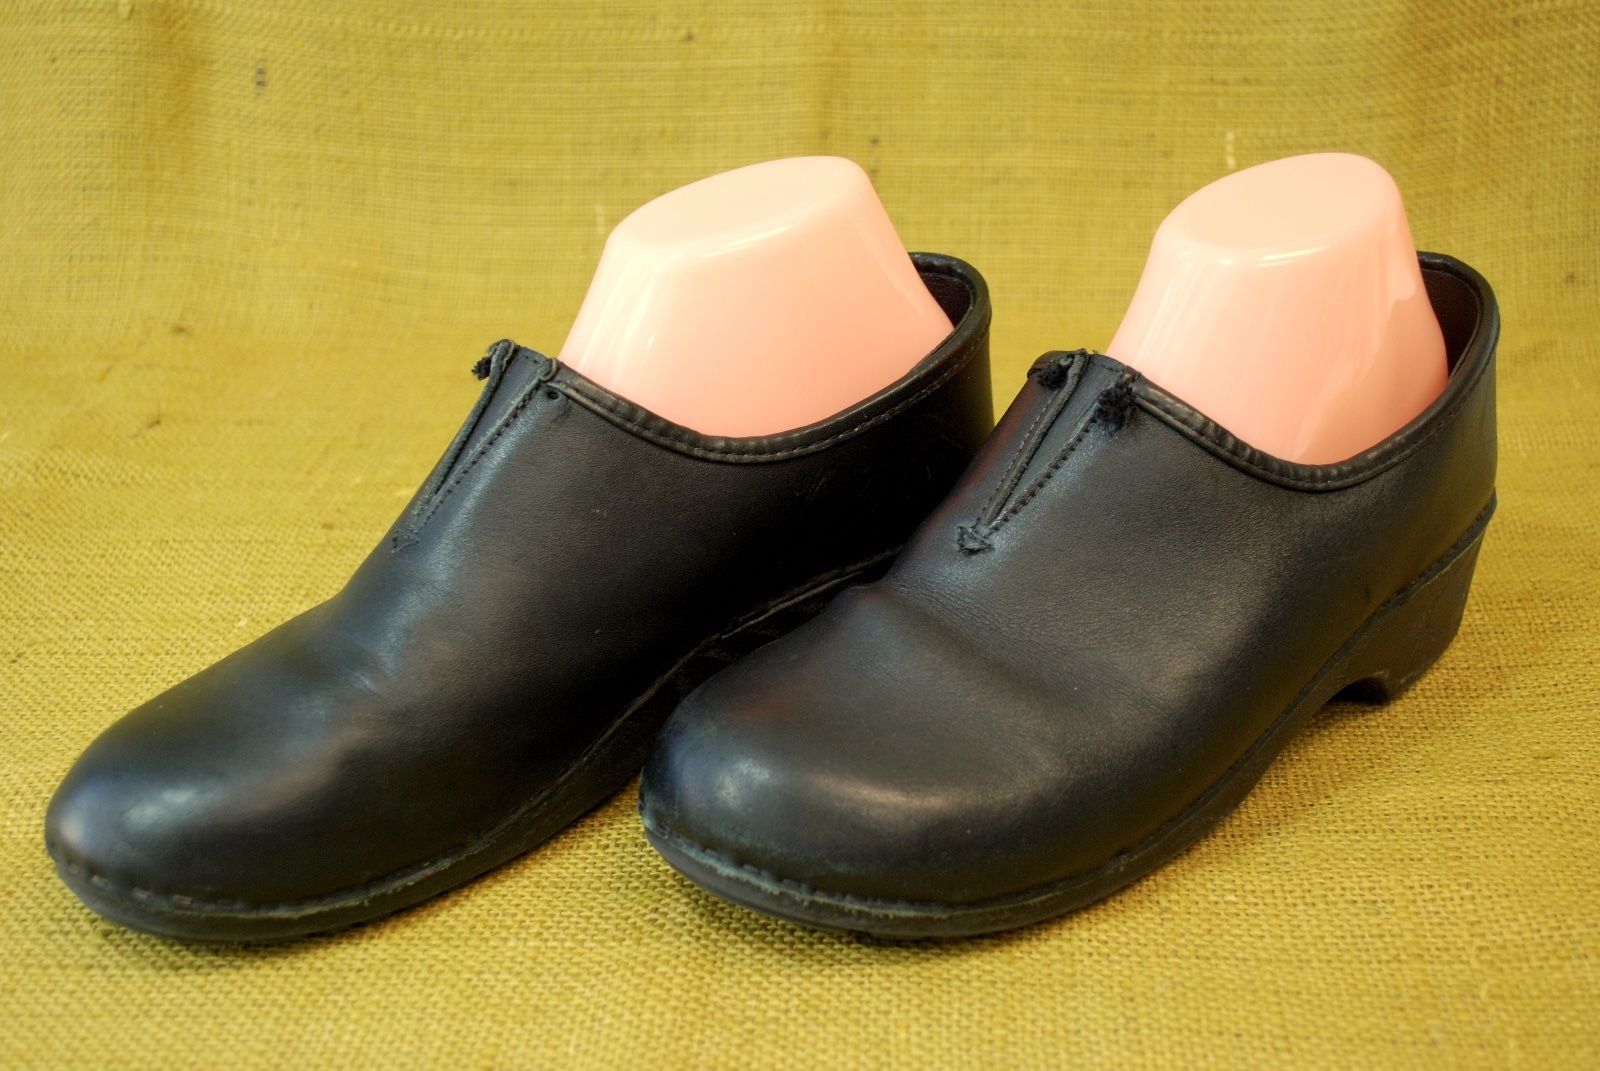 LL BEAN Black Leather Slip On Clogs Shoes Women's Size 9 - Flats & Oxfords